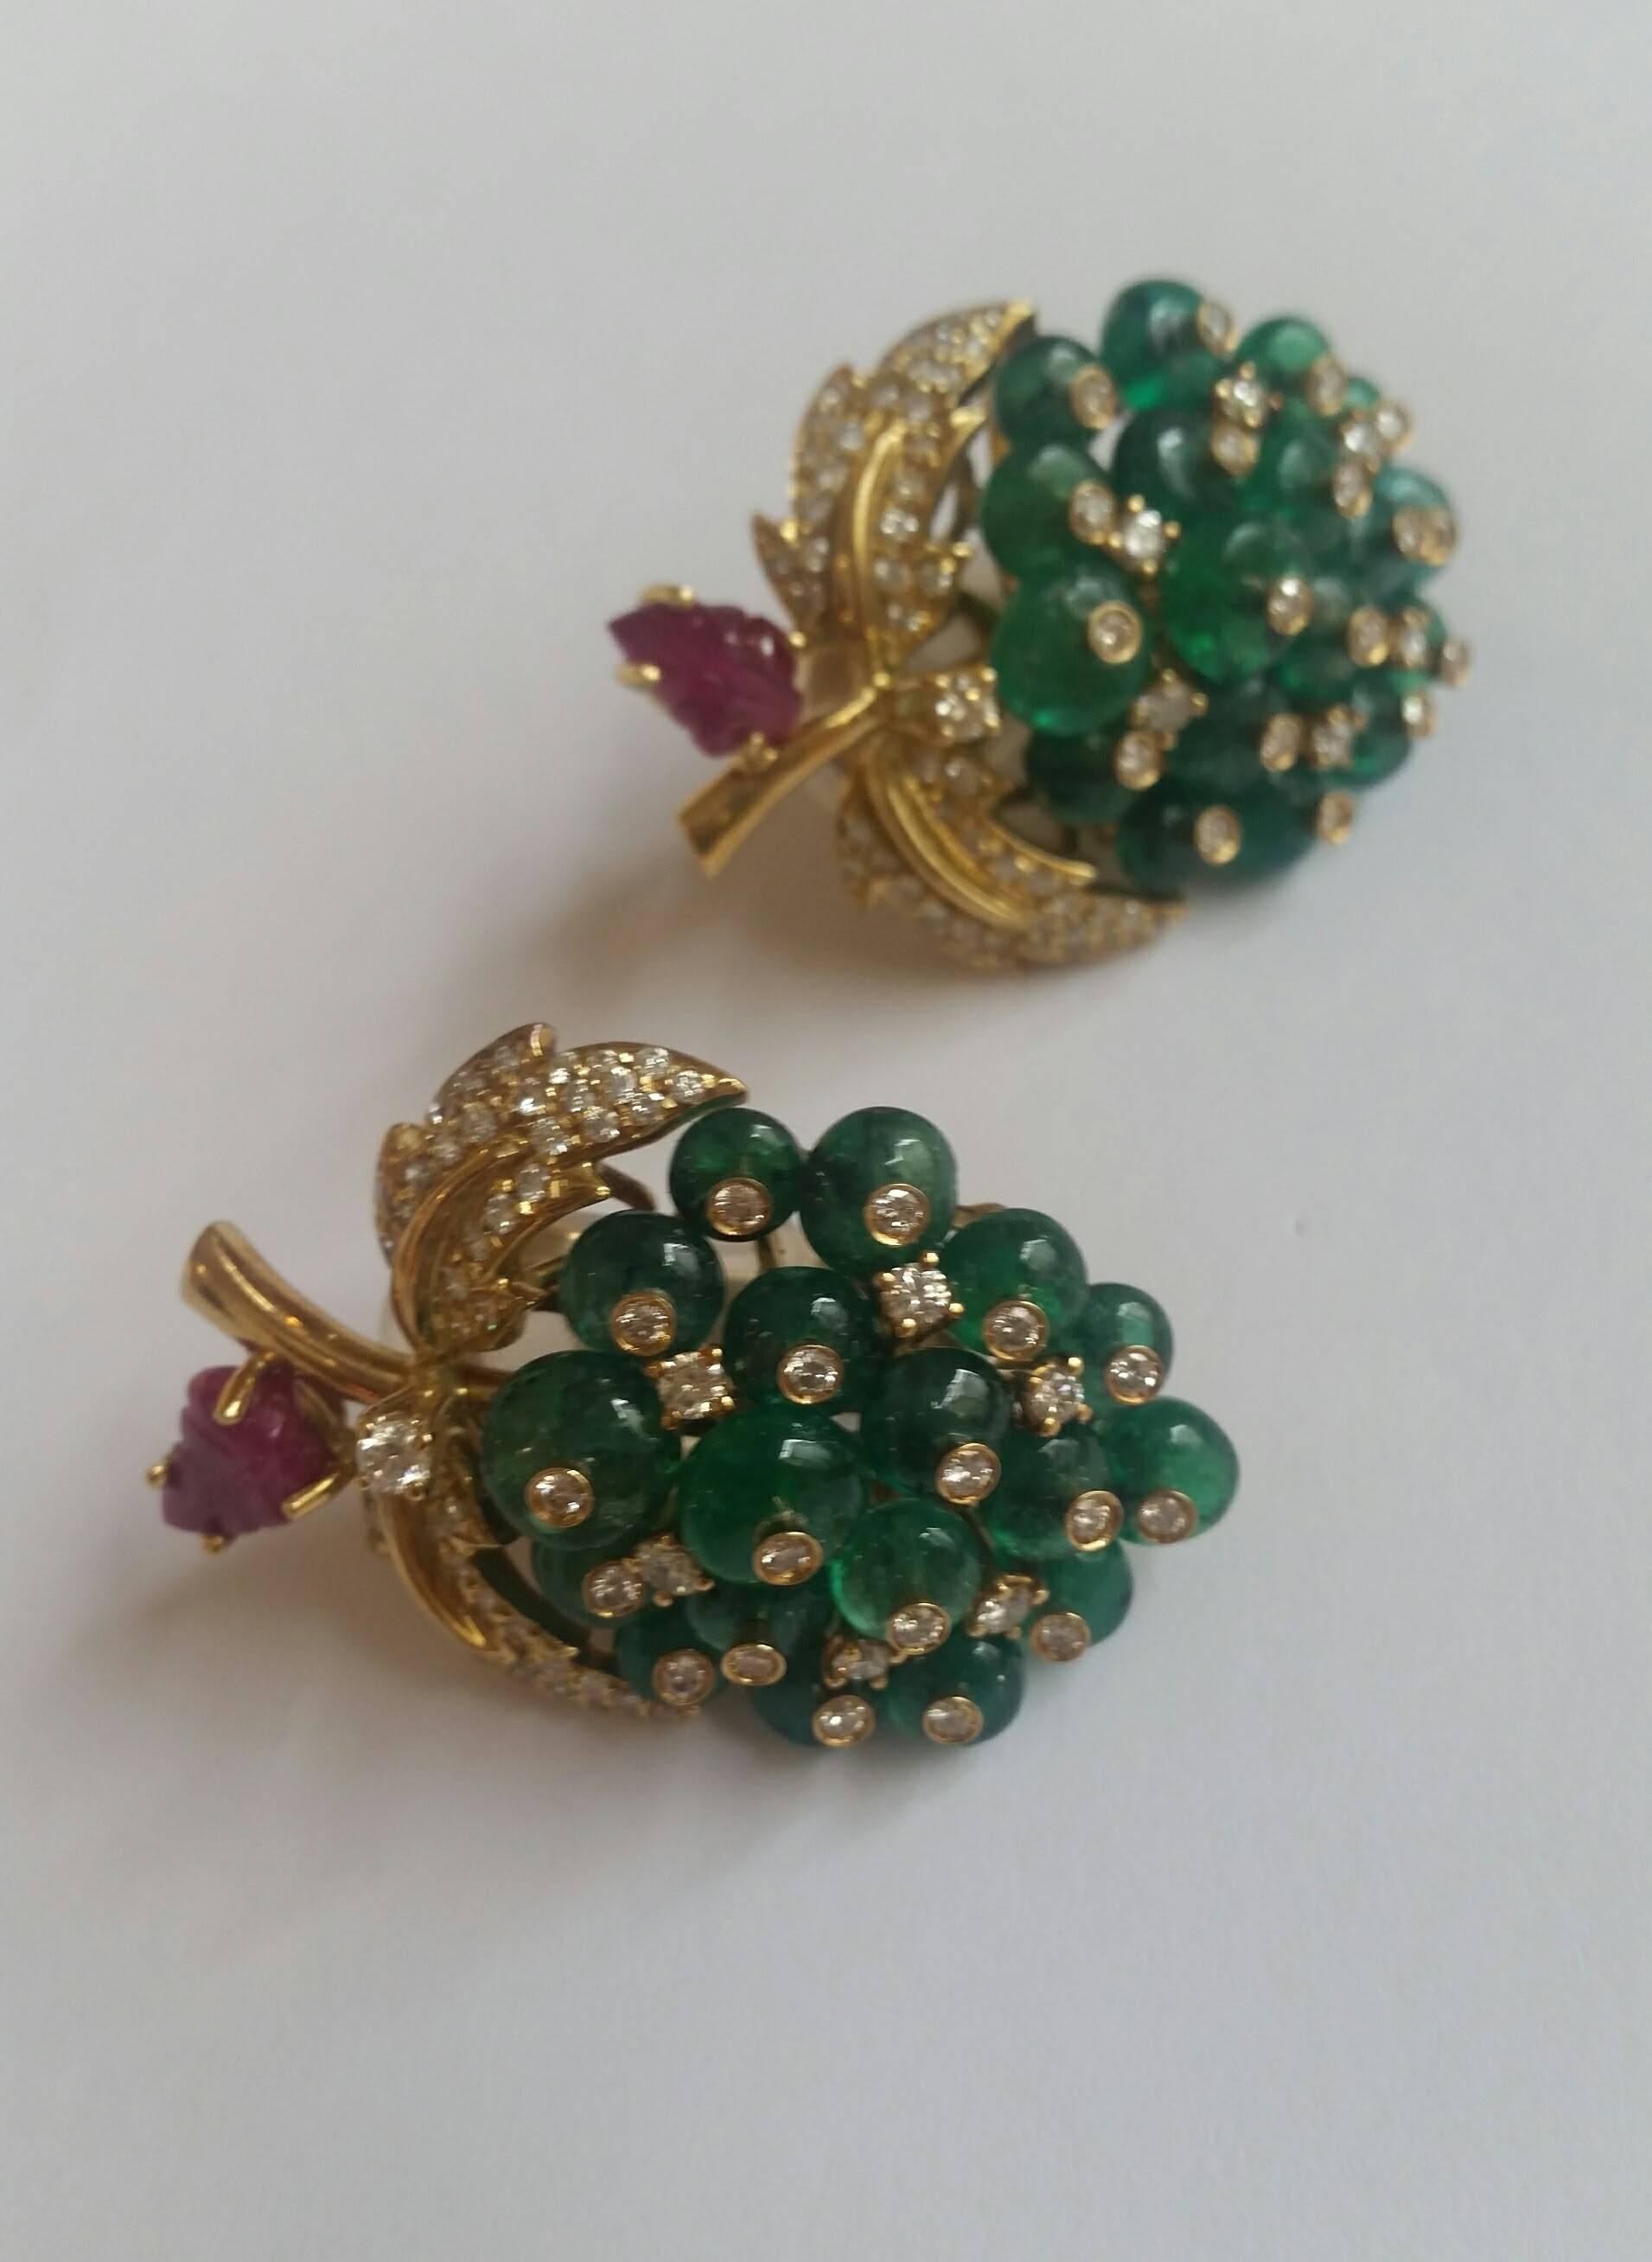 Big and important '70 Italian earrings  in 18 kt gold, about 30 ct natural emerald cabochon,  about 4 ct diamonds and 2 ct carved natural rubies. 